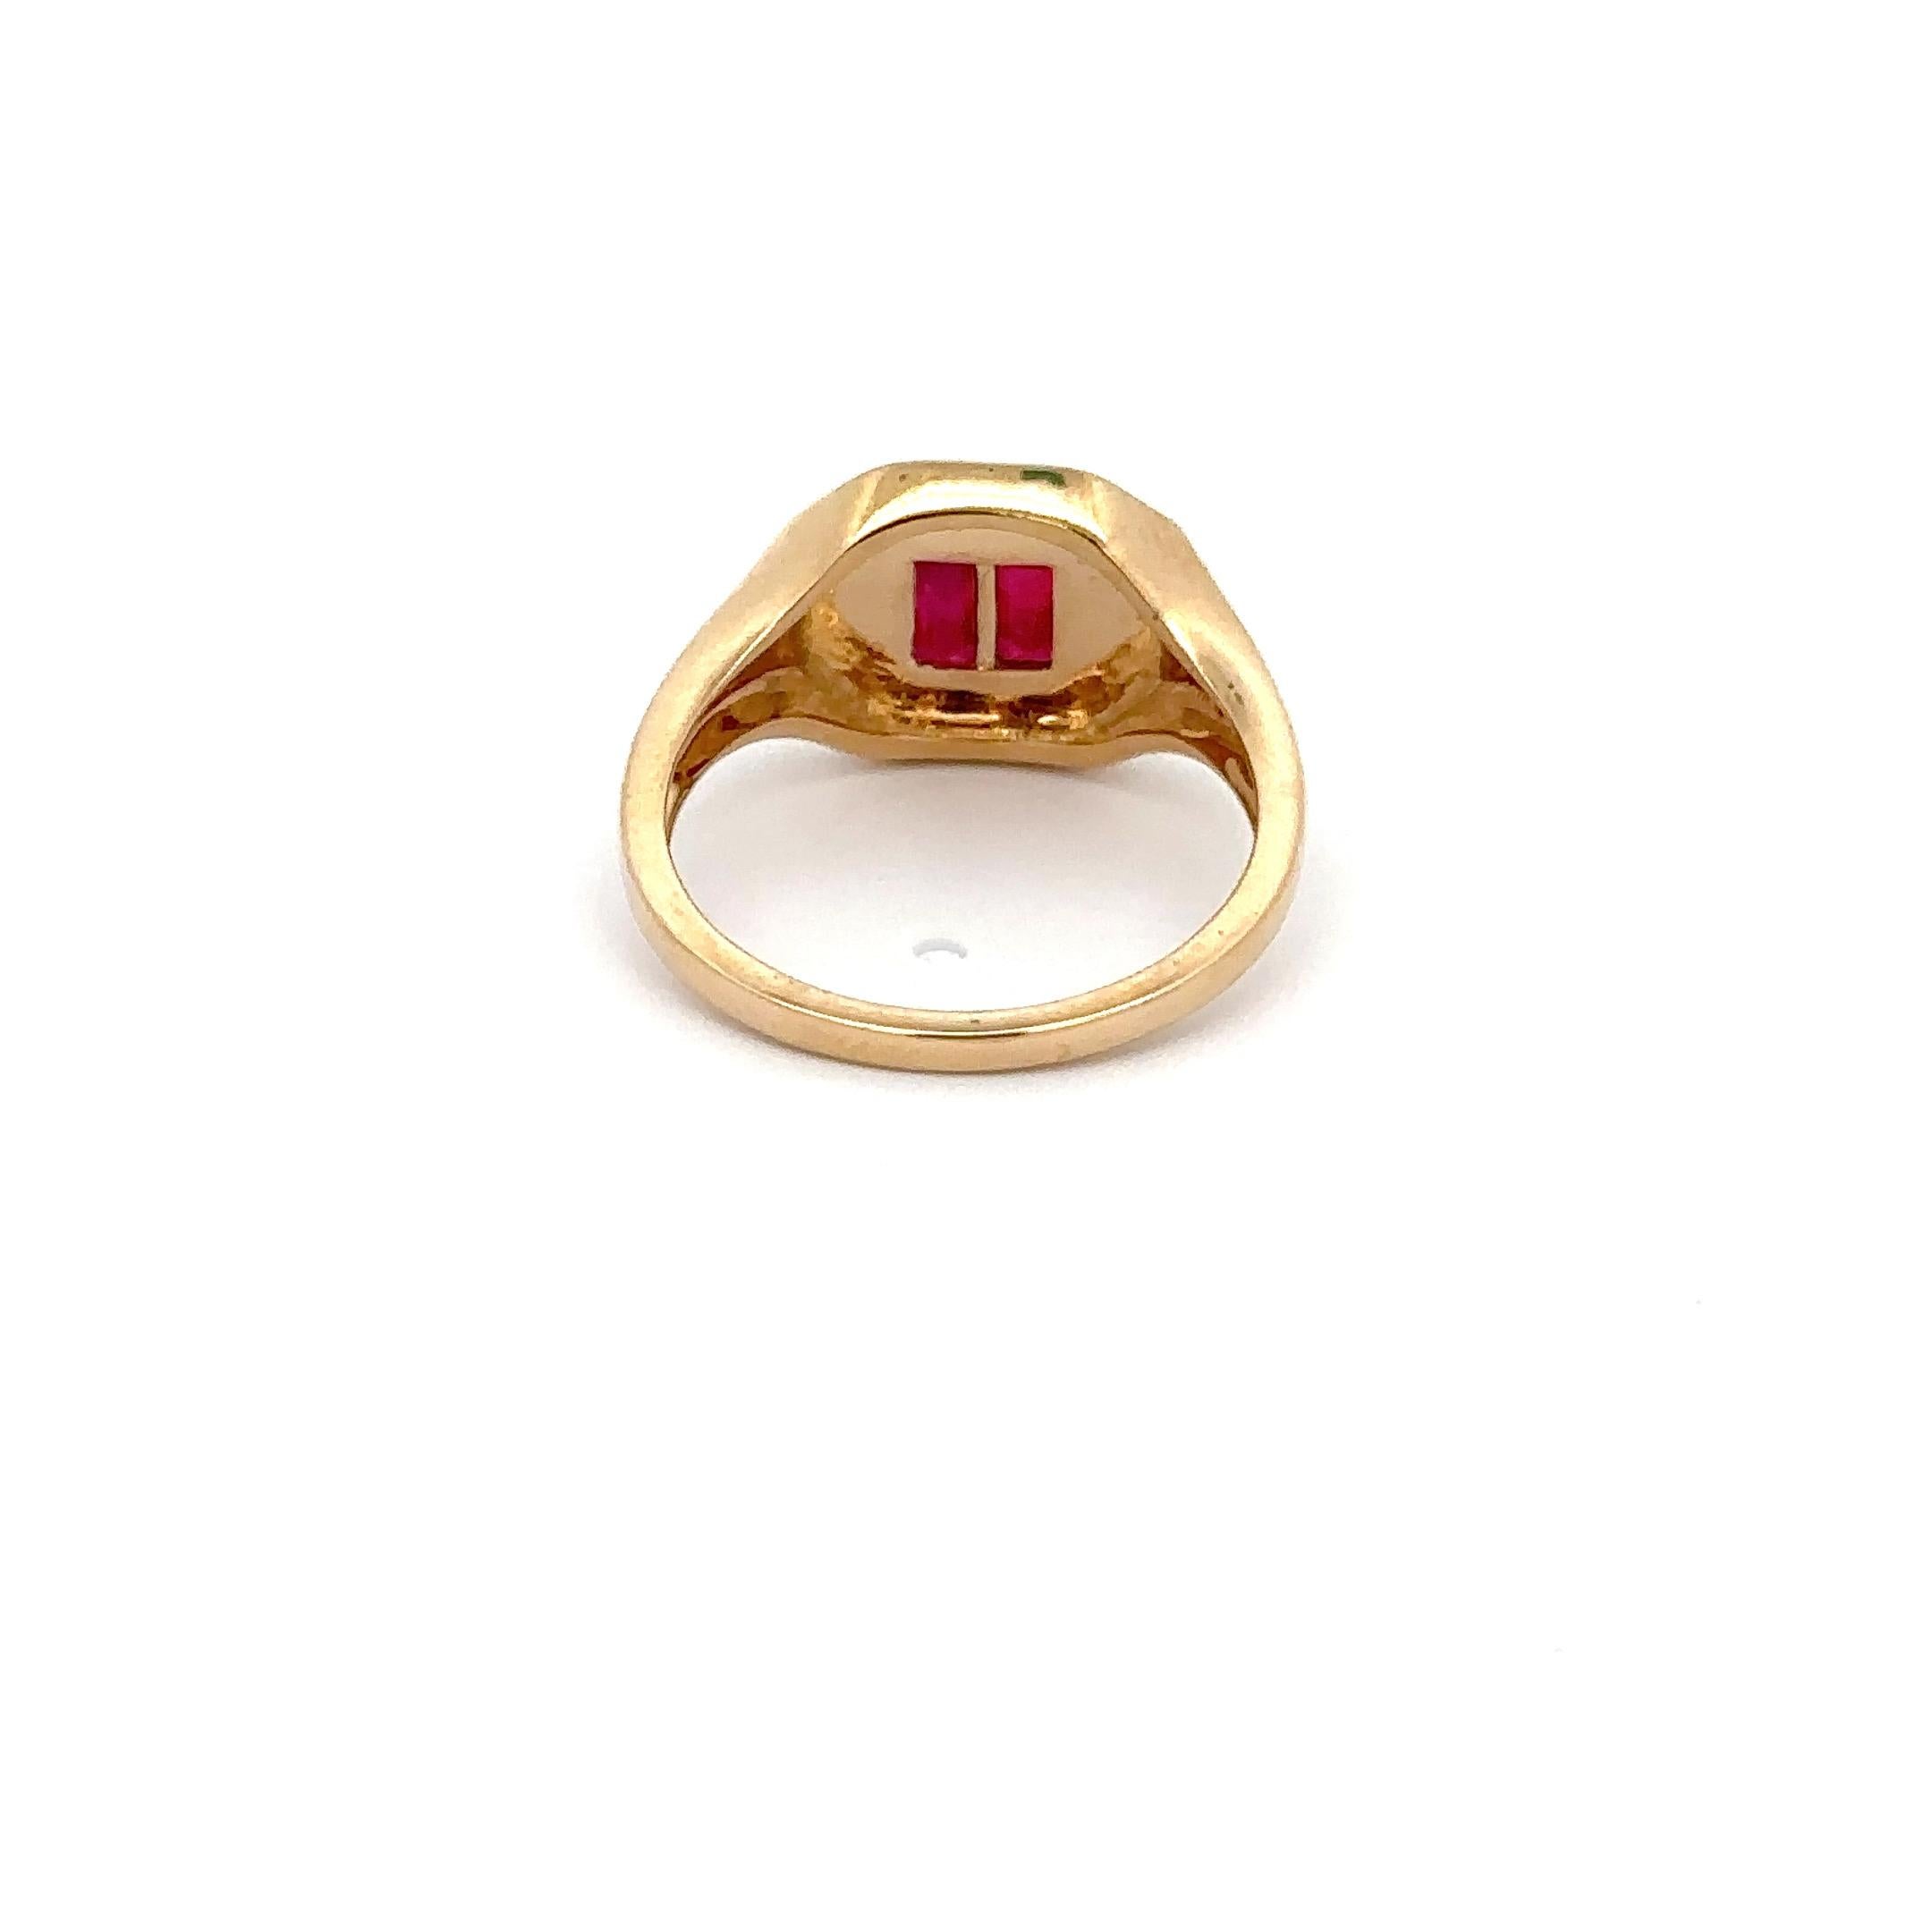 For Sale:  Baguette Cut Ruby Signet Ring 14kt Solid Yellow Gold Ruby Gemstone Pinky Ring 5